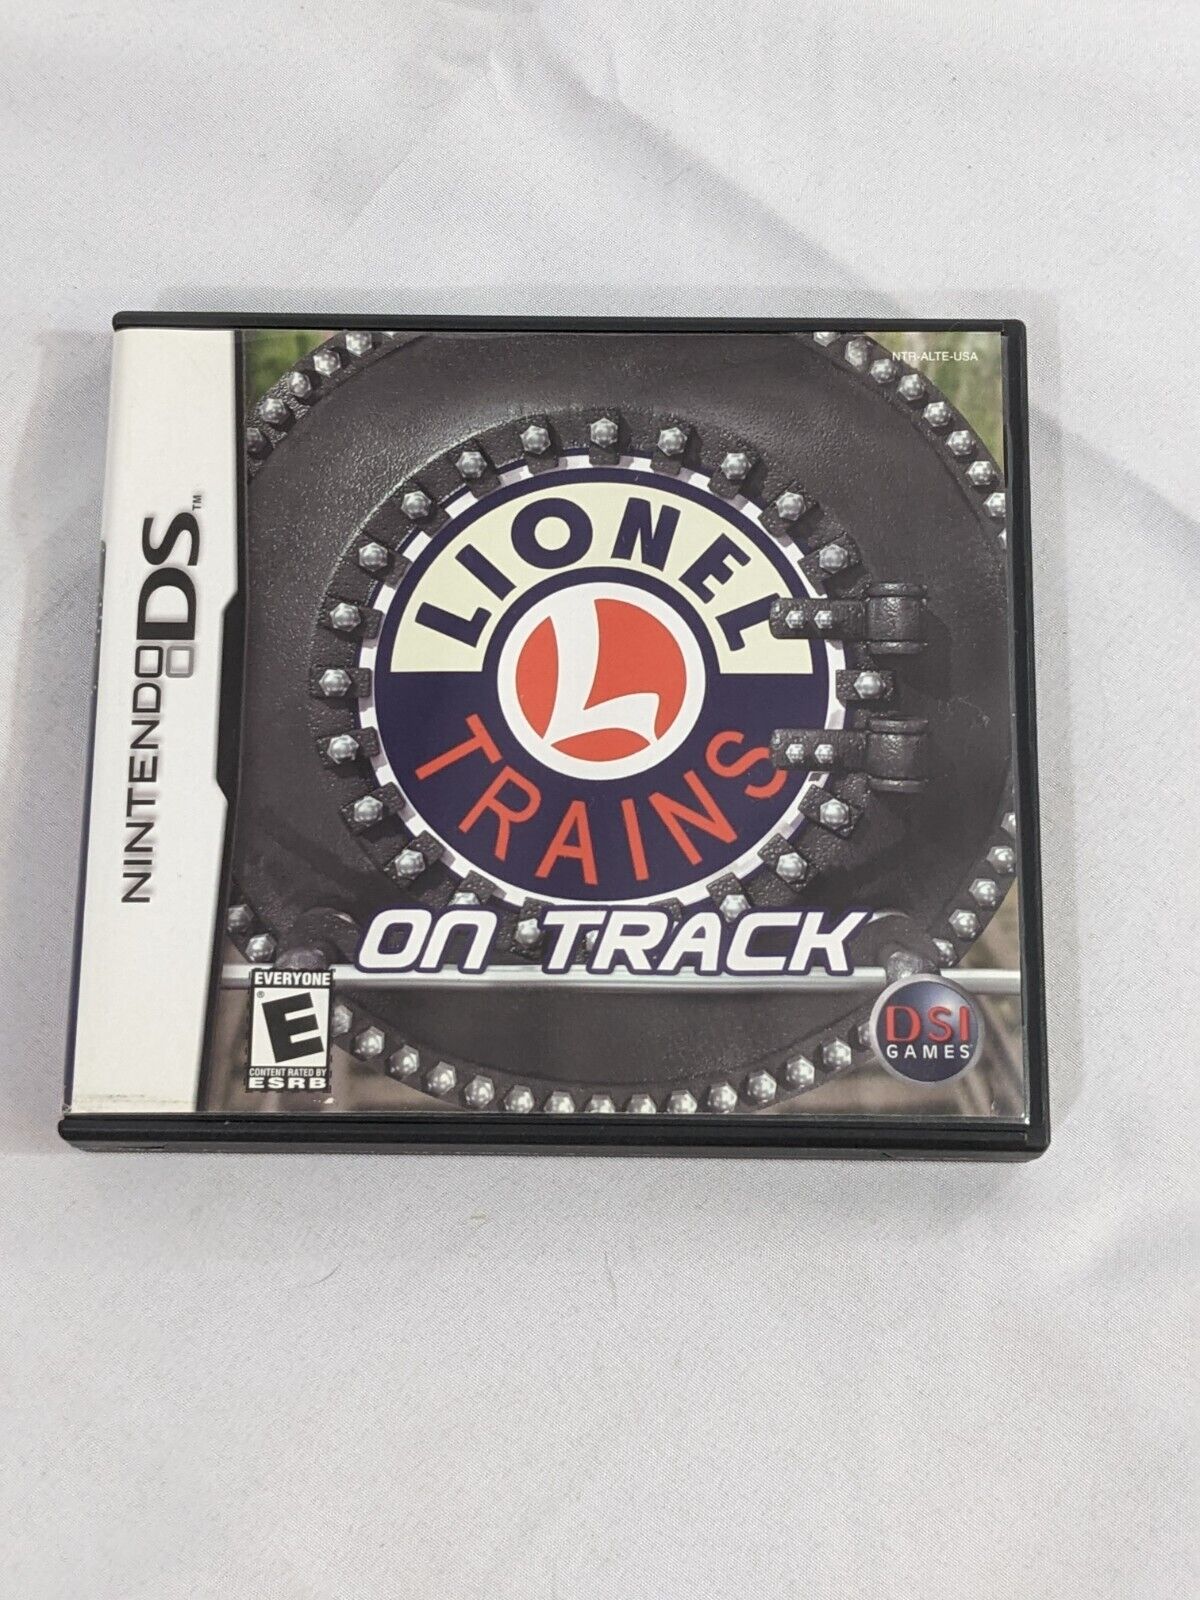 Nintendo DS Lionel Trains on Track Manual & Cartridge Game Case Only